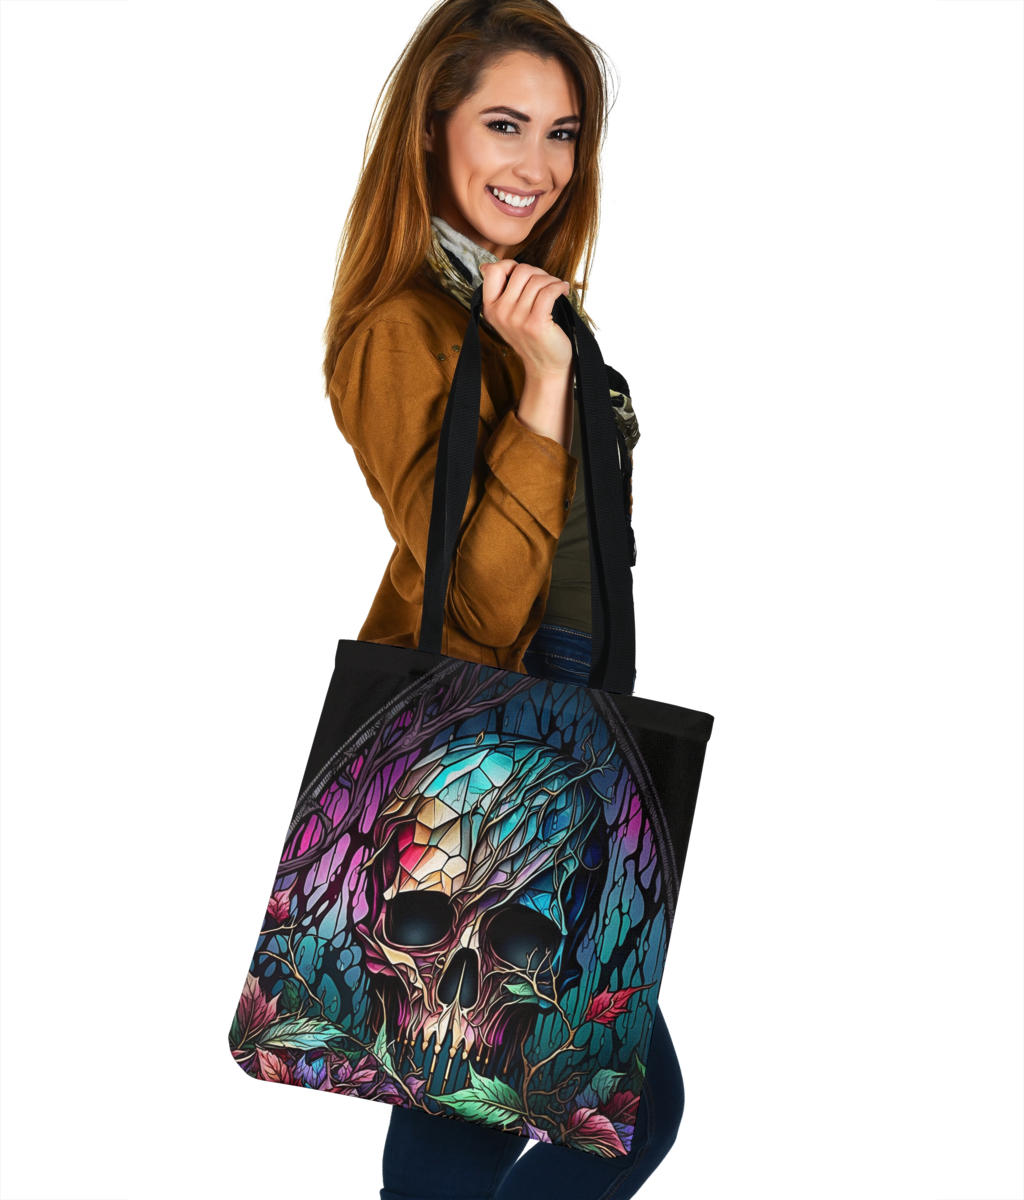 Stained Glass Skull Design Tote Bags - Imagination Collection